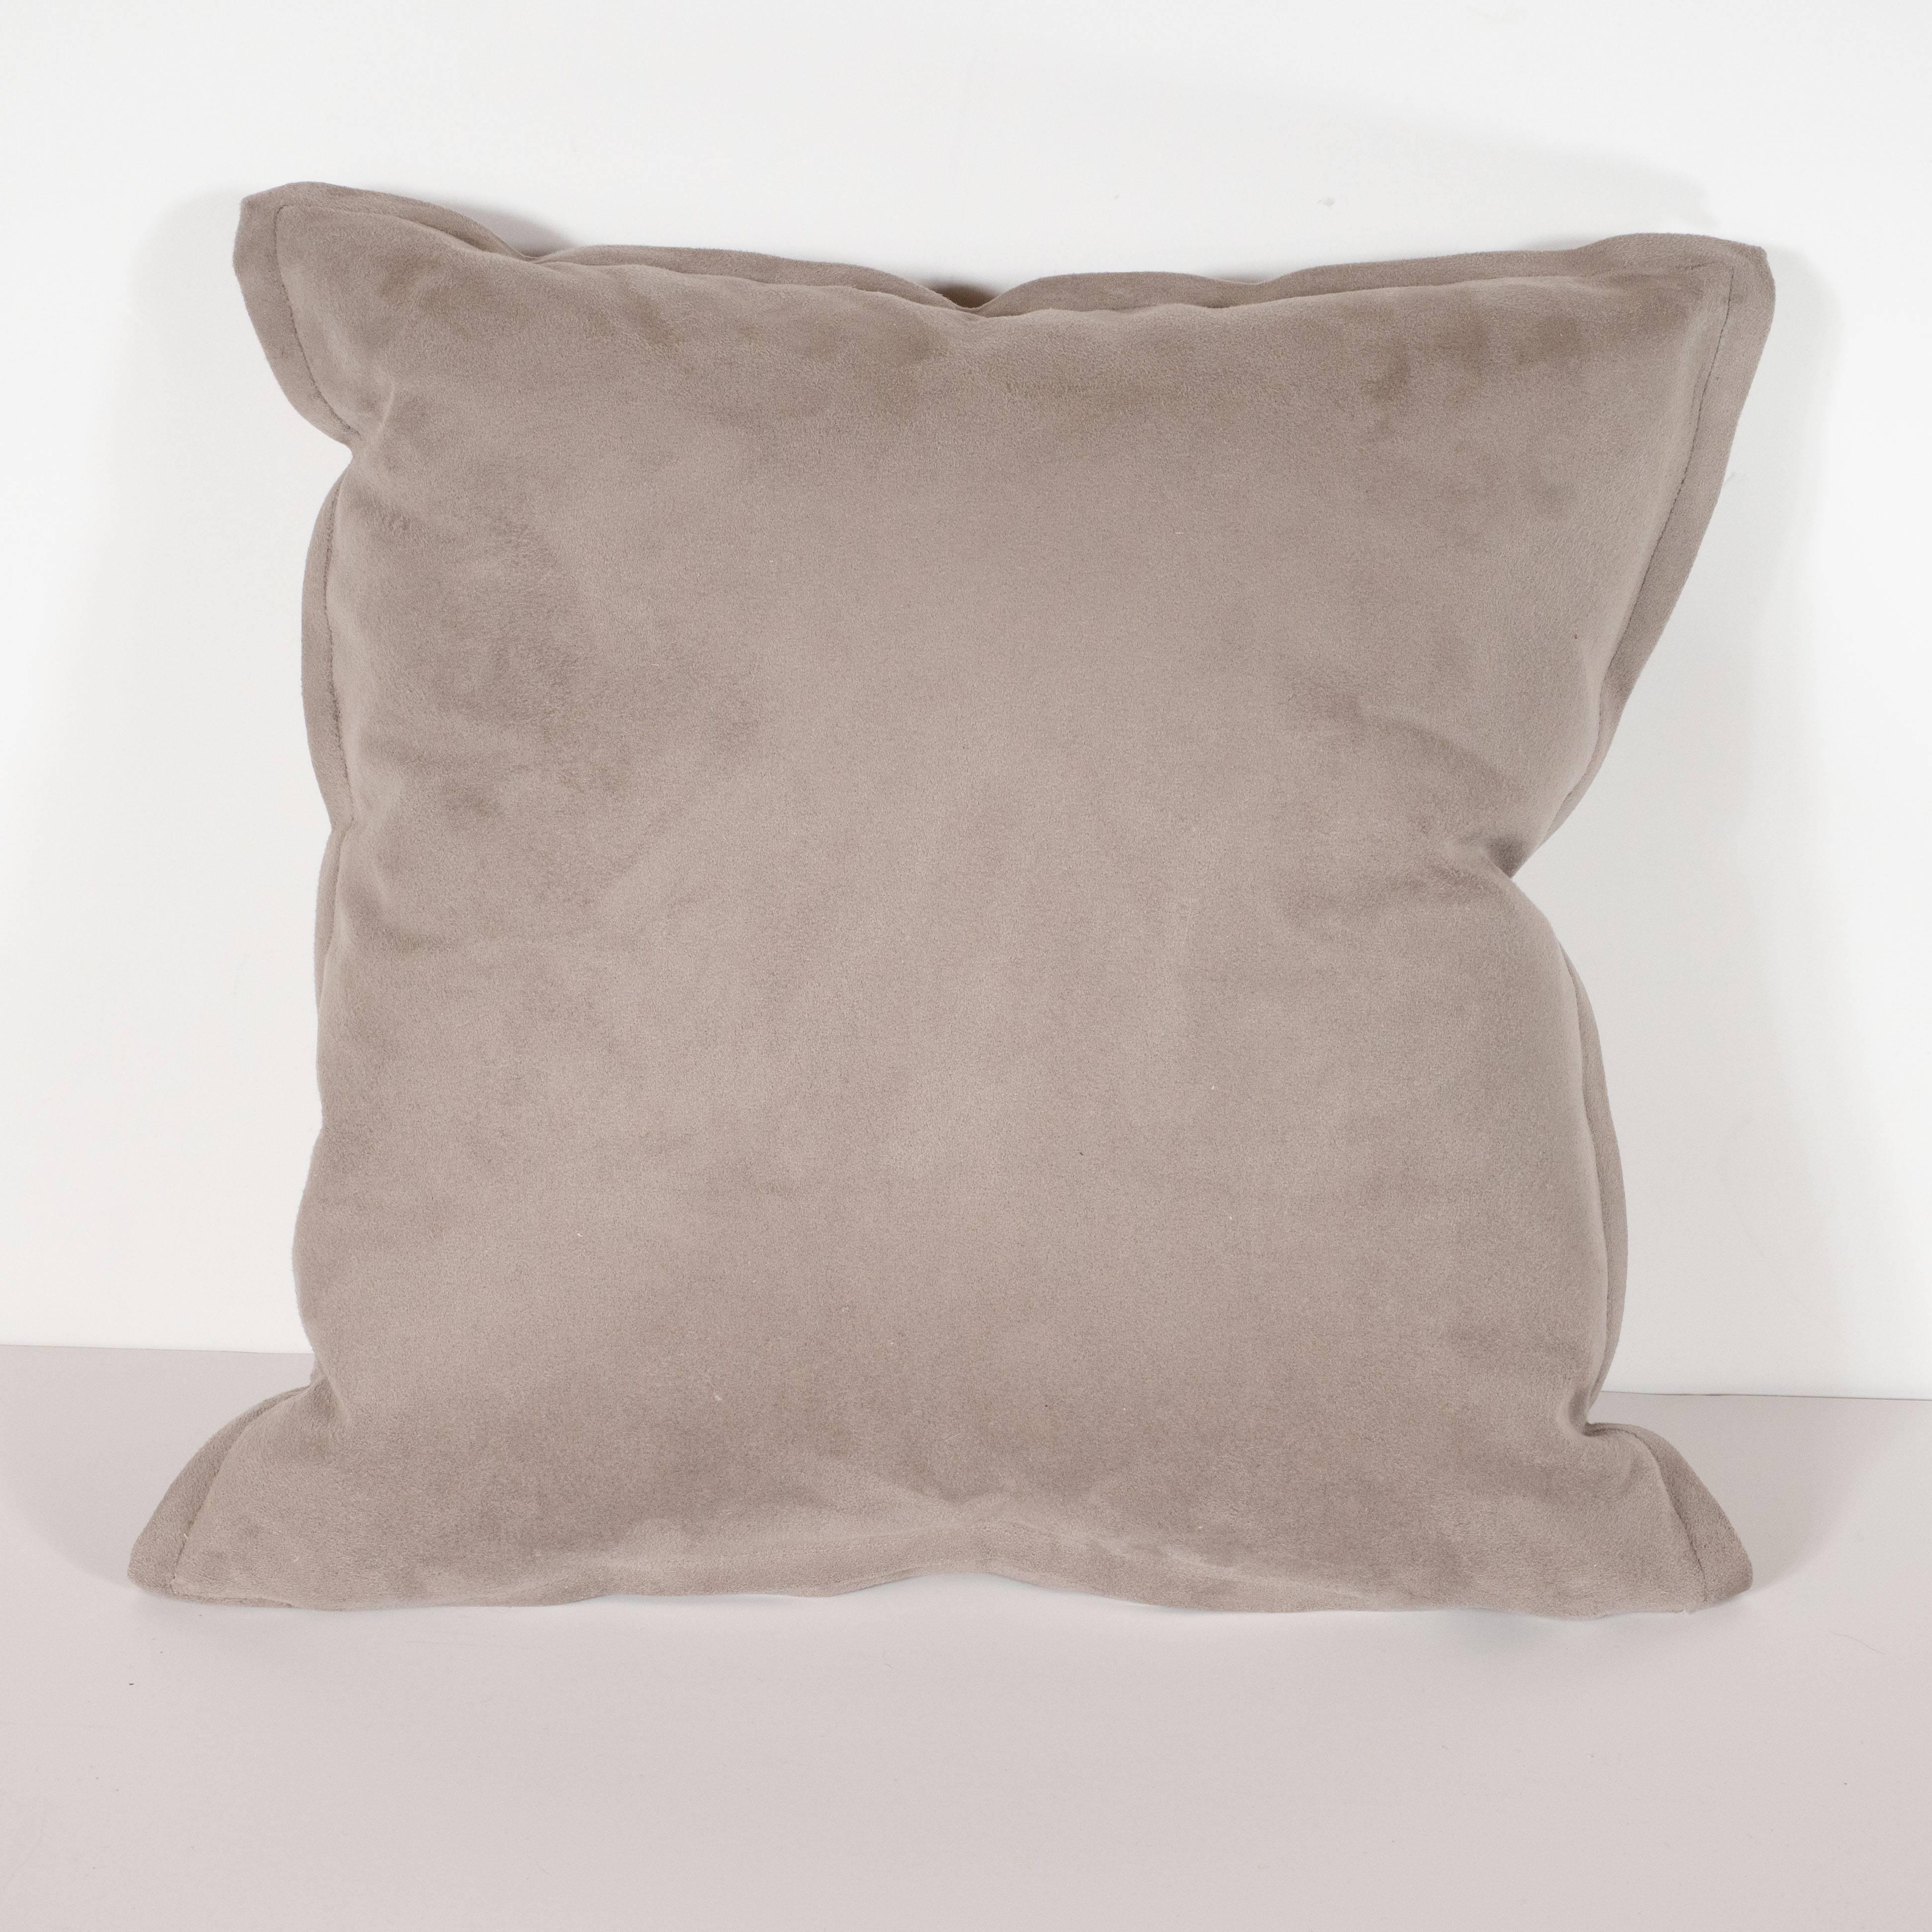 Fur Custom Modernist Horsehide and Ultra Suede Banded Pillows in Metallic Tones